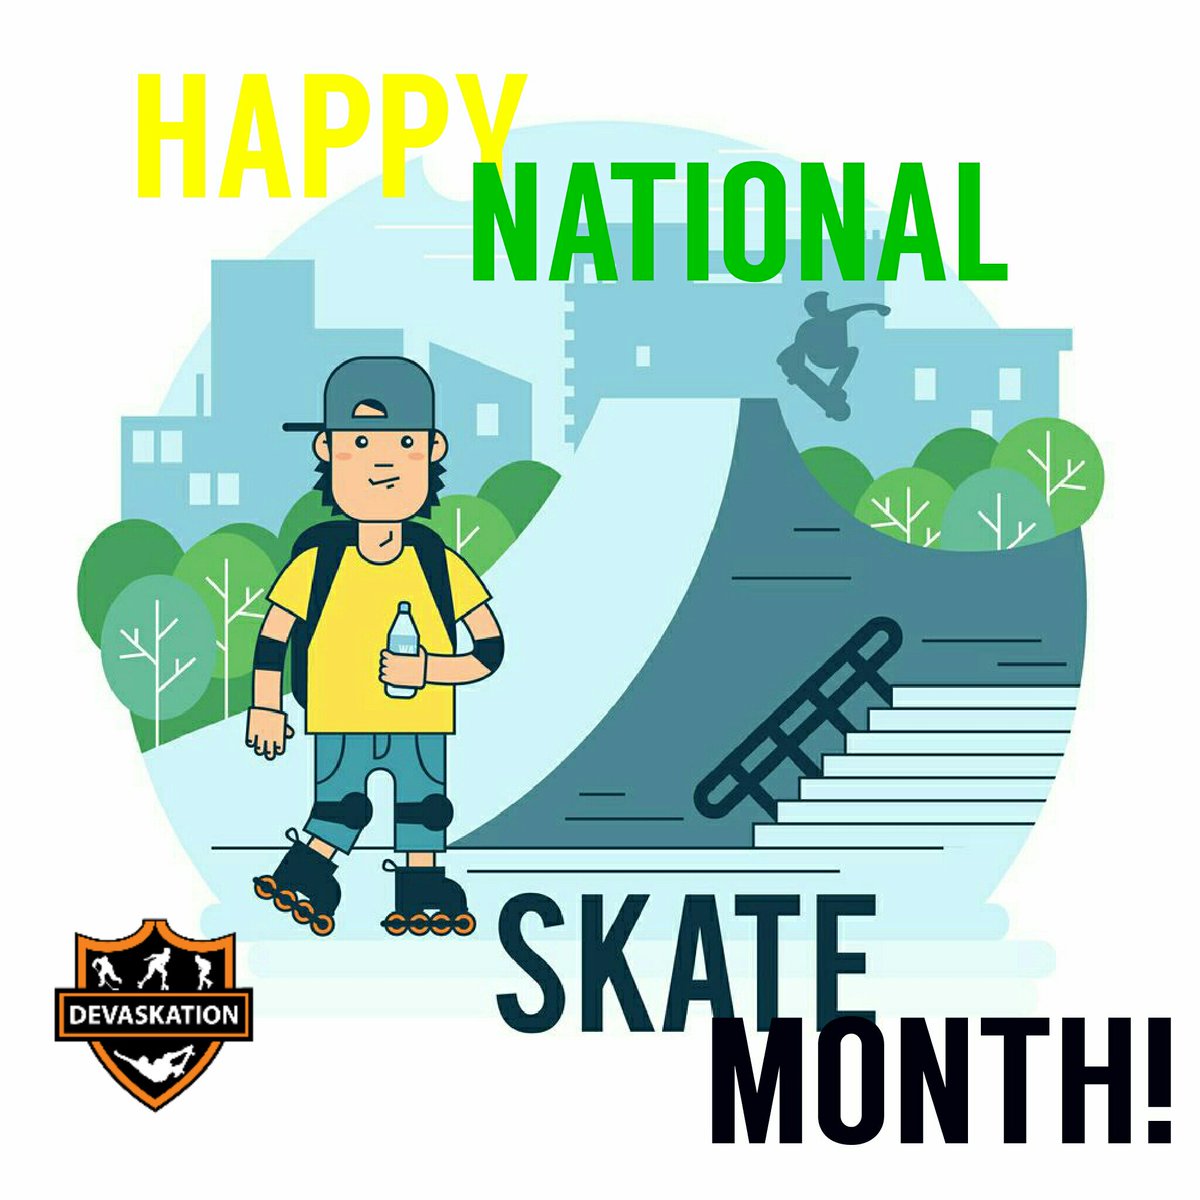 It's National Roller Skating Month! How will you celebrate??